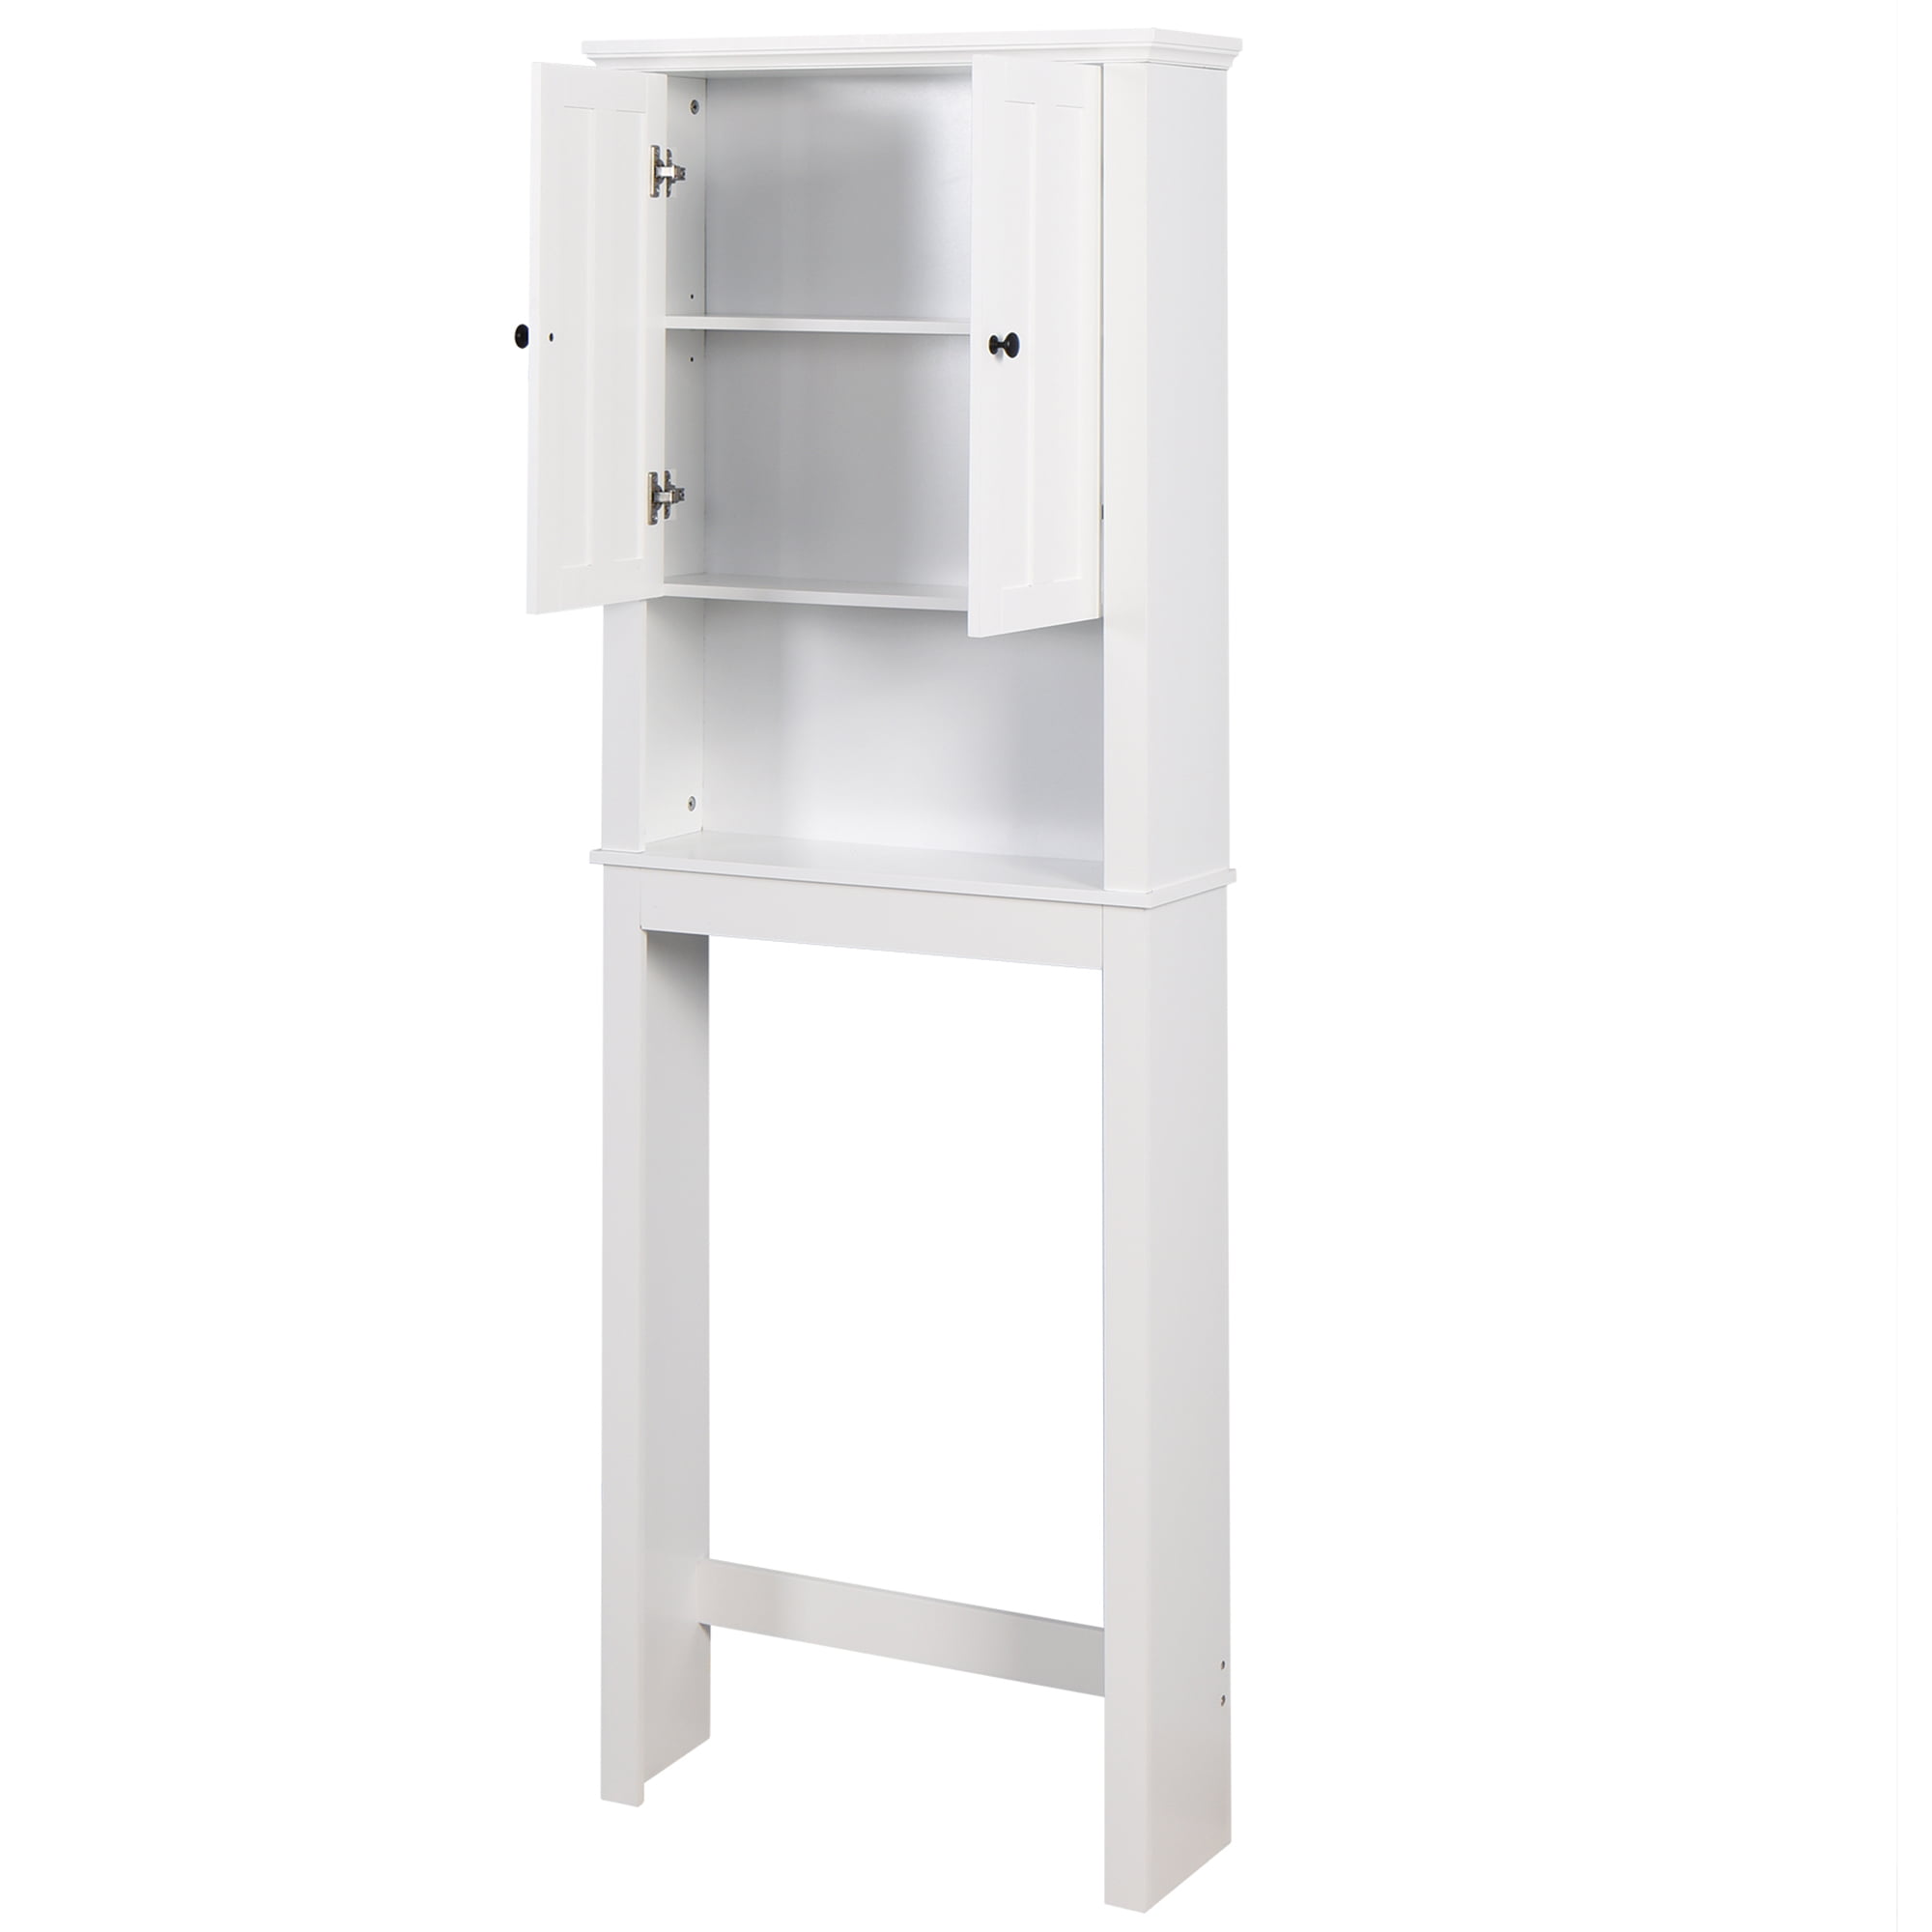 Narrow Storage Cabinet, 67'' Bathroom Cabinet with 2 Doors and 6 Shelves1PC